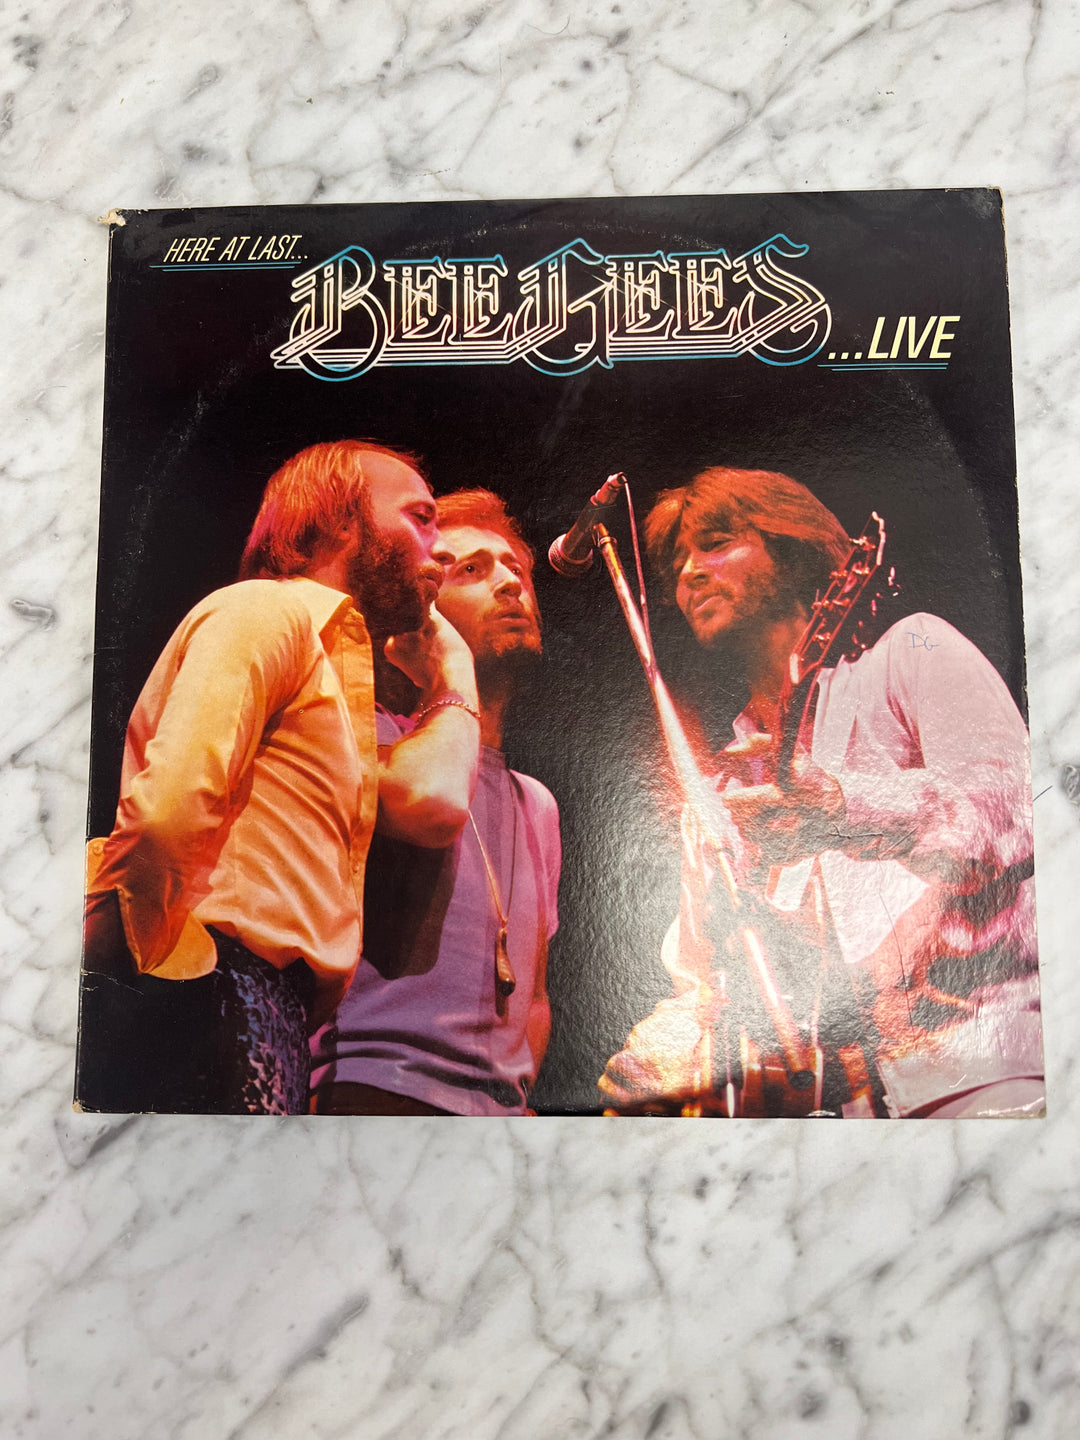 The Bee Gees - Here At Last Live Vinyl Record